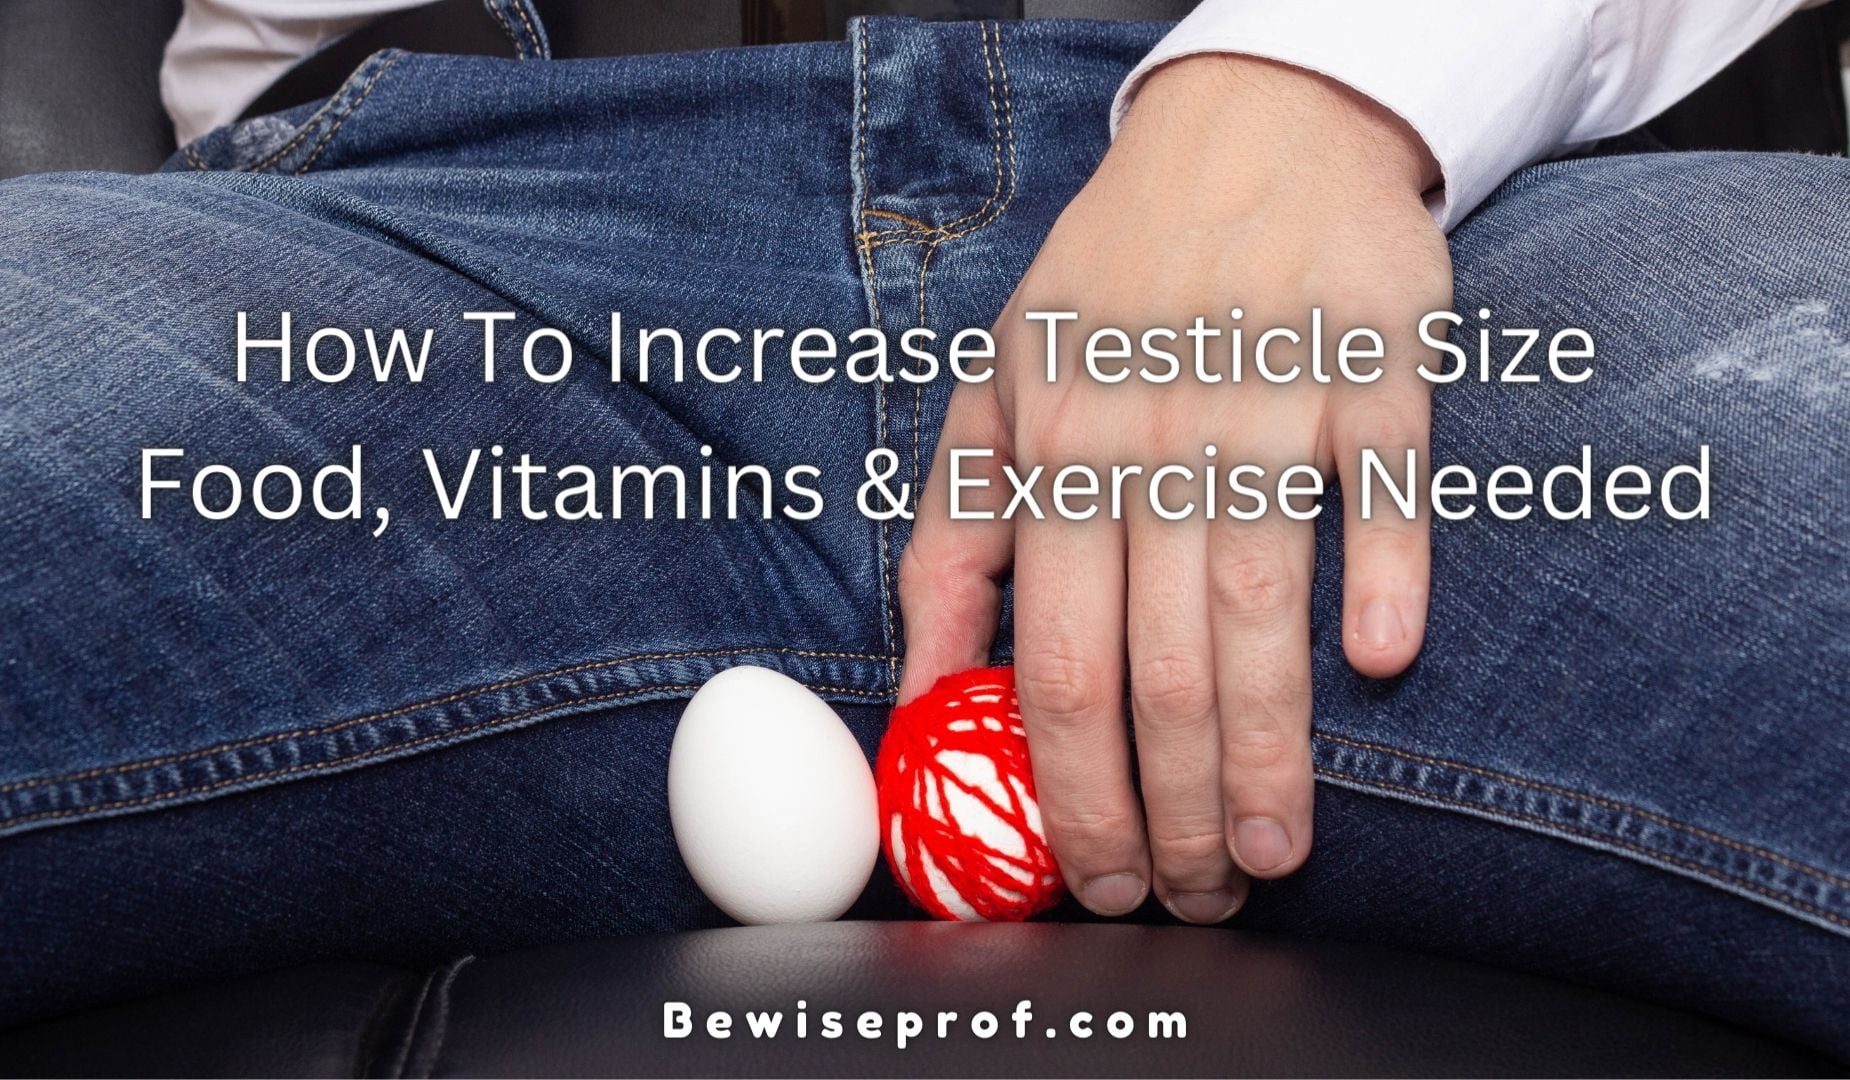 How To Increase Testicle Size